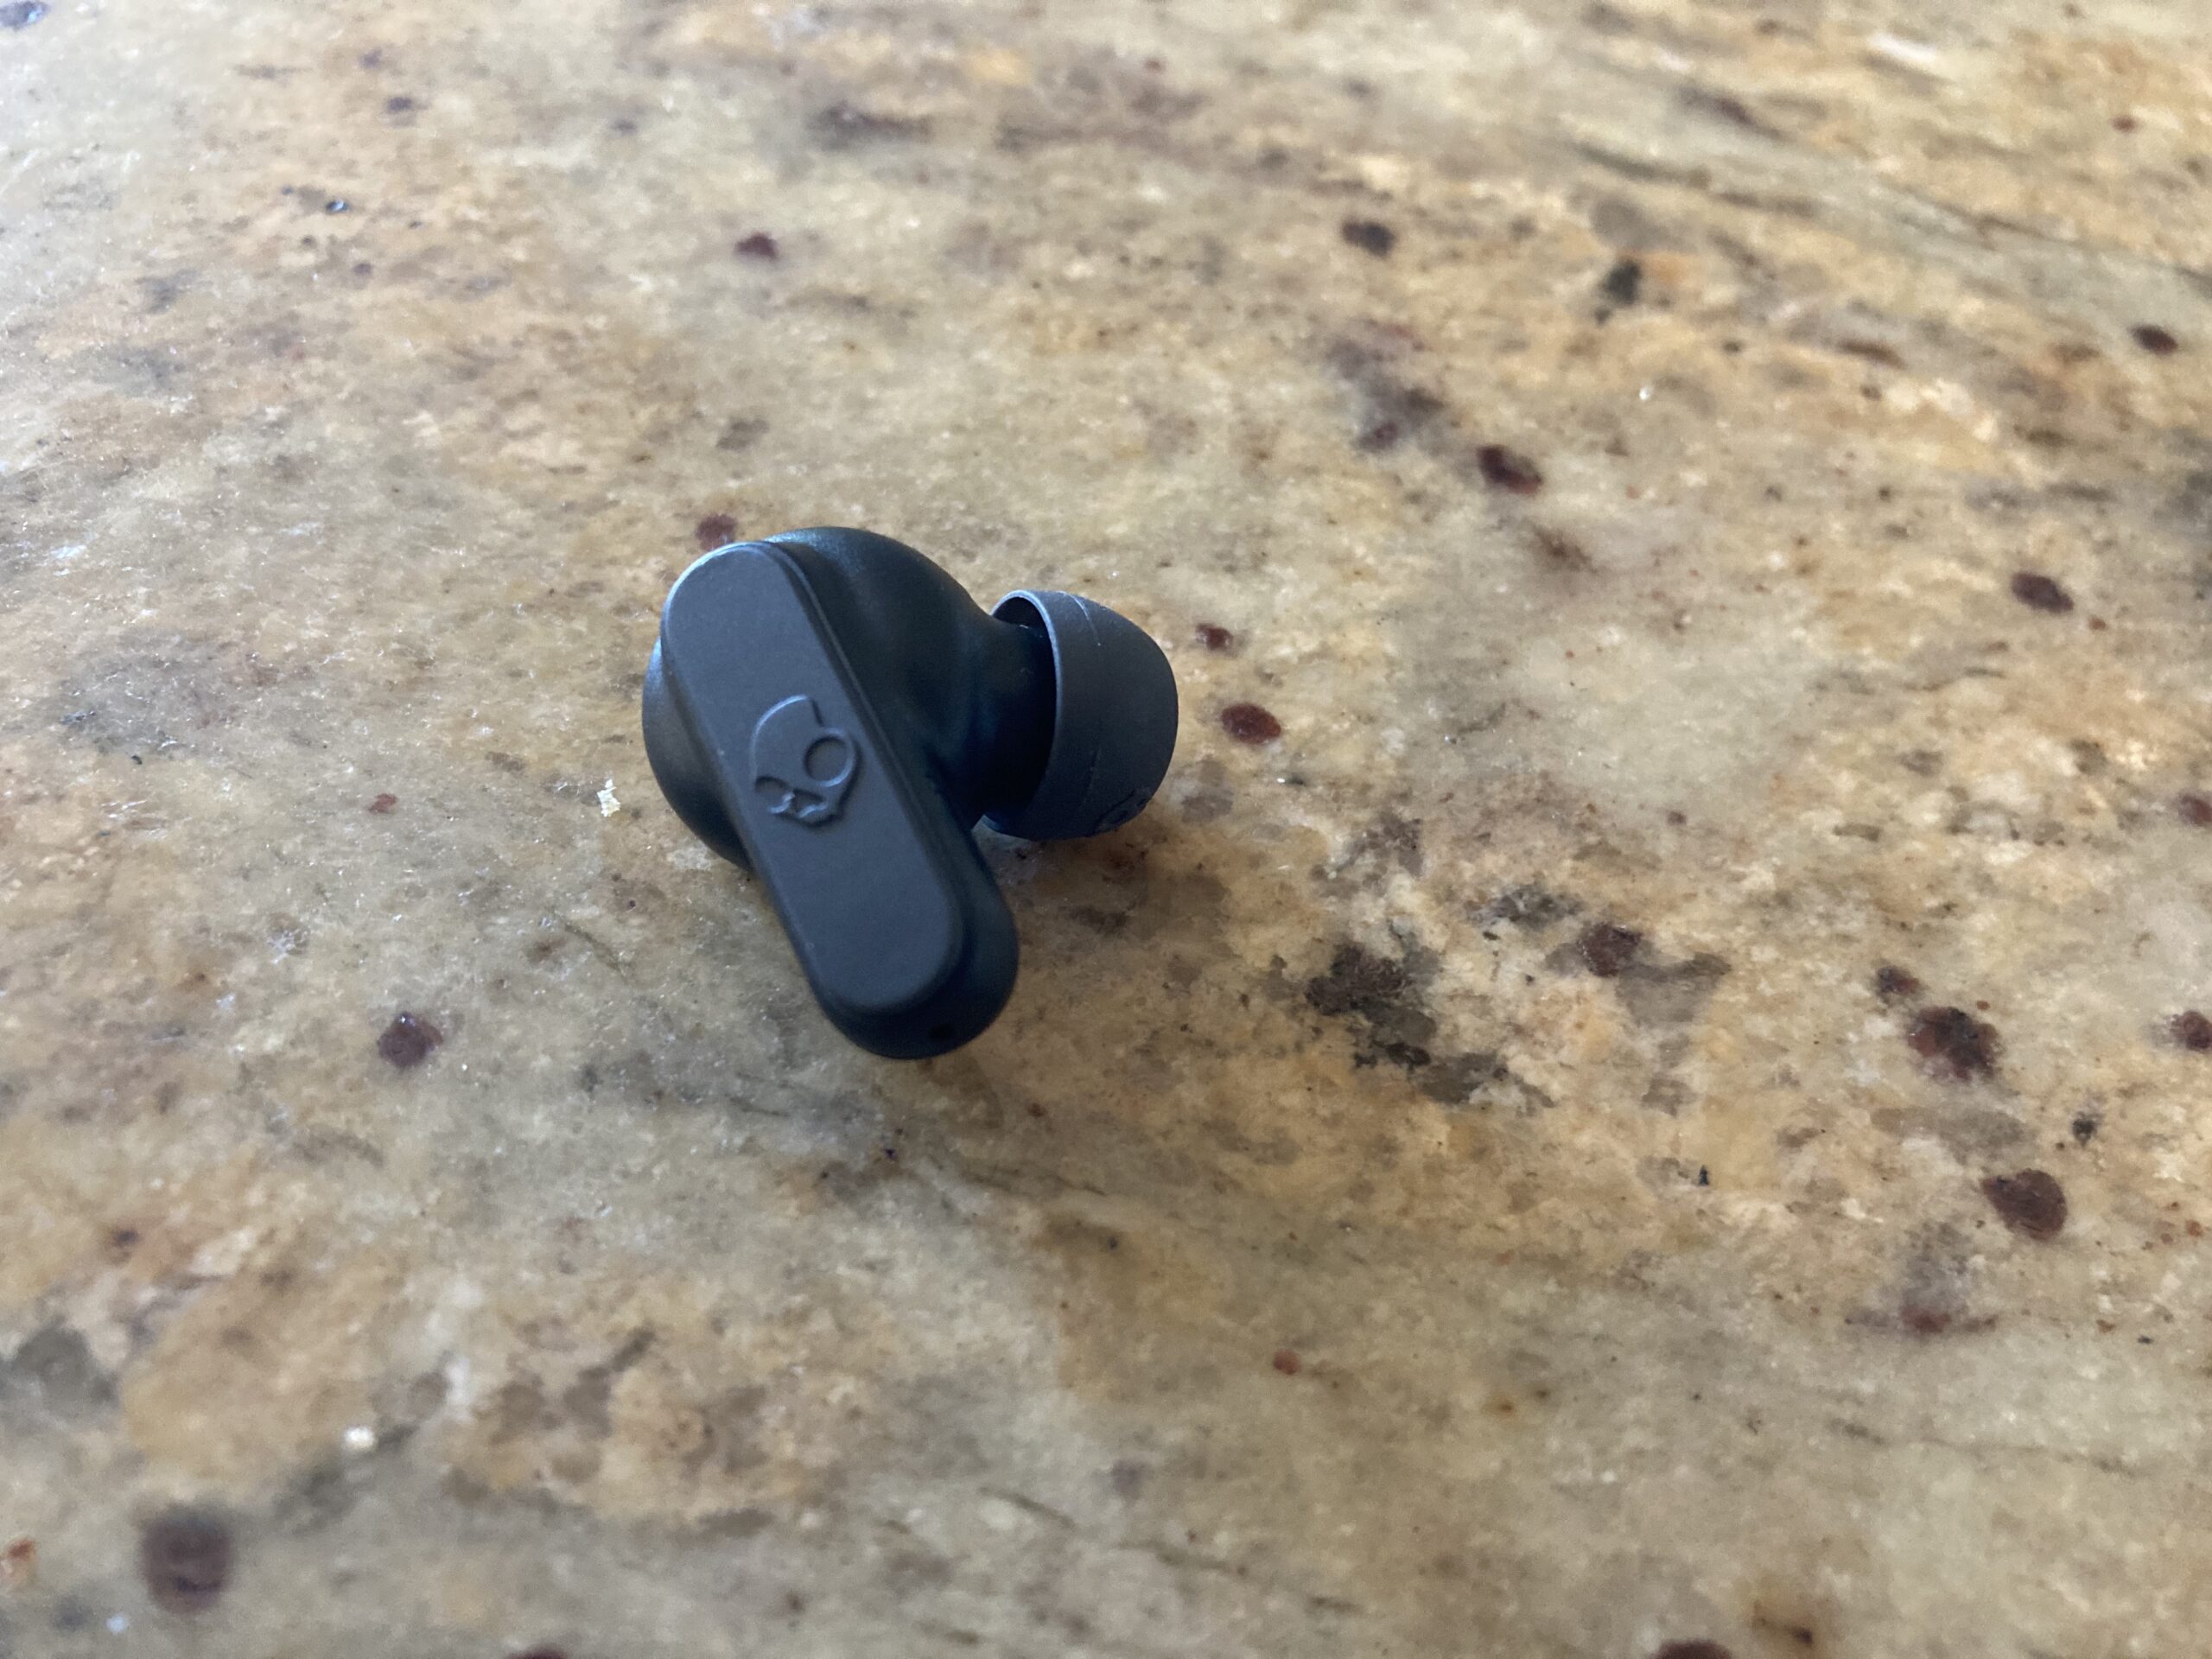 Skullcandy Dime earphones review: These wireless earbuds are a sweet deal